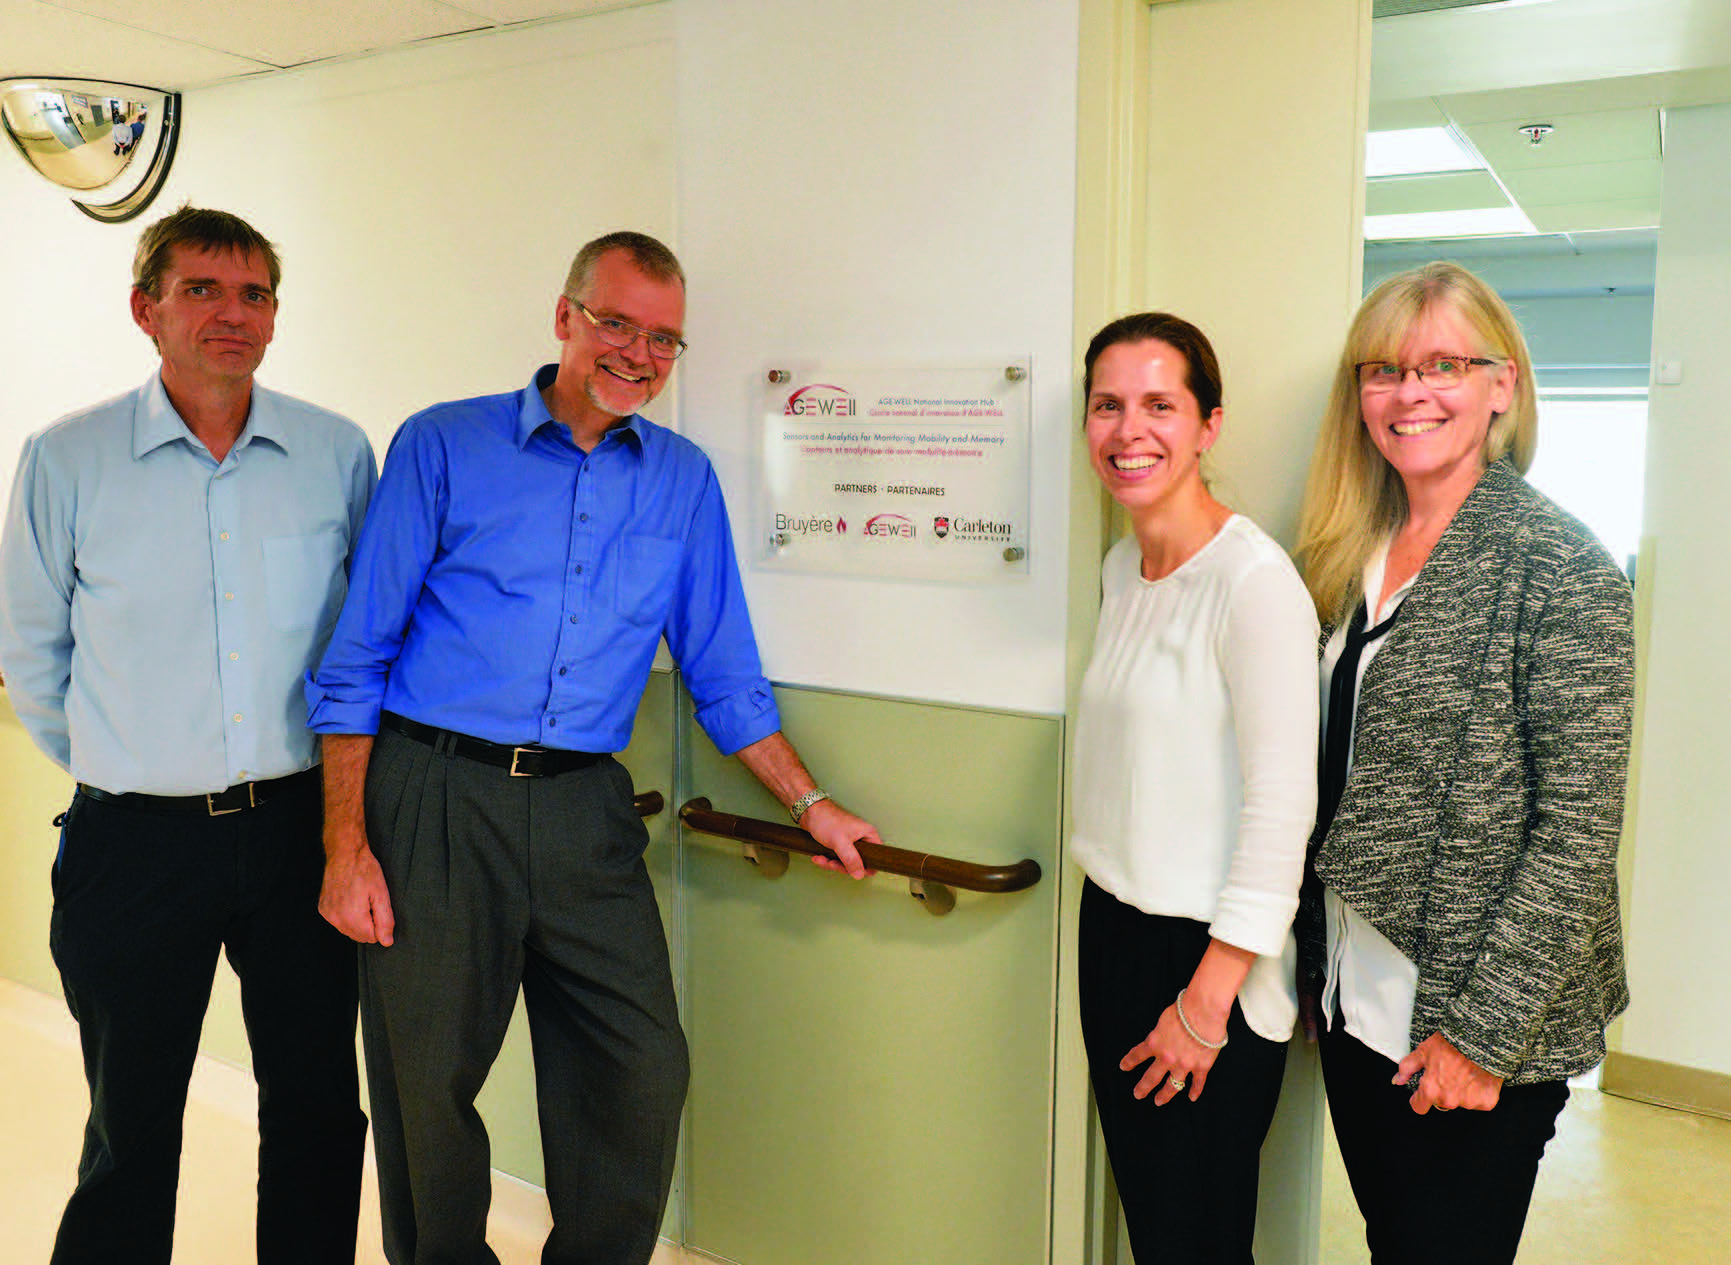 Drs. Bruce Wallace, Frank Knoefel, Véronique French Merkley and Heidi Sveistrup pose for a photo at the Bruyère hospital in Ottawa.